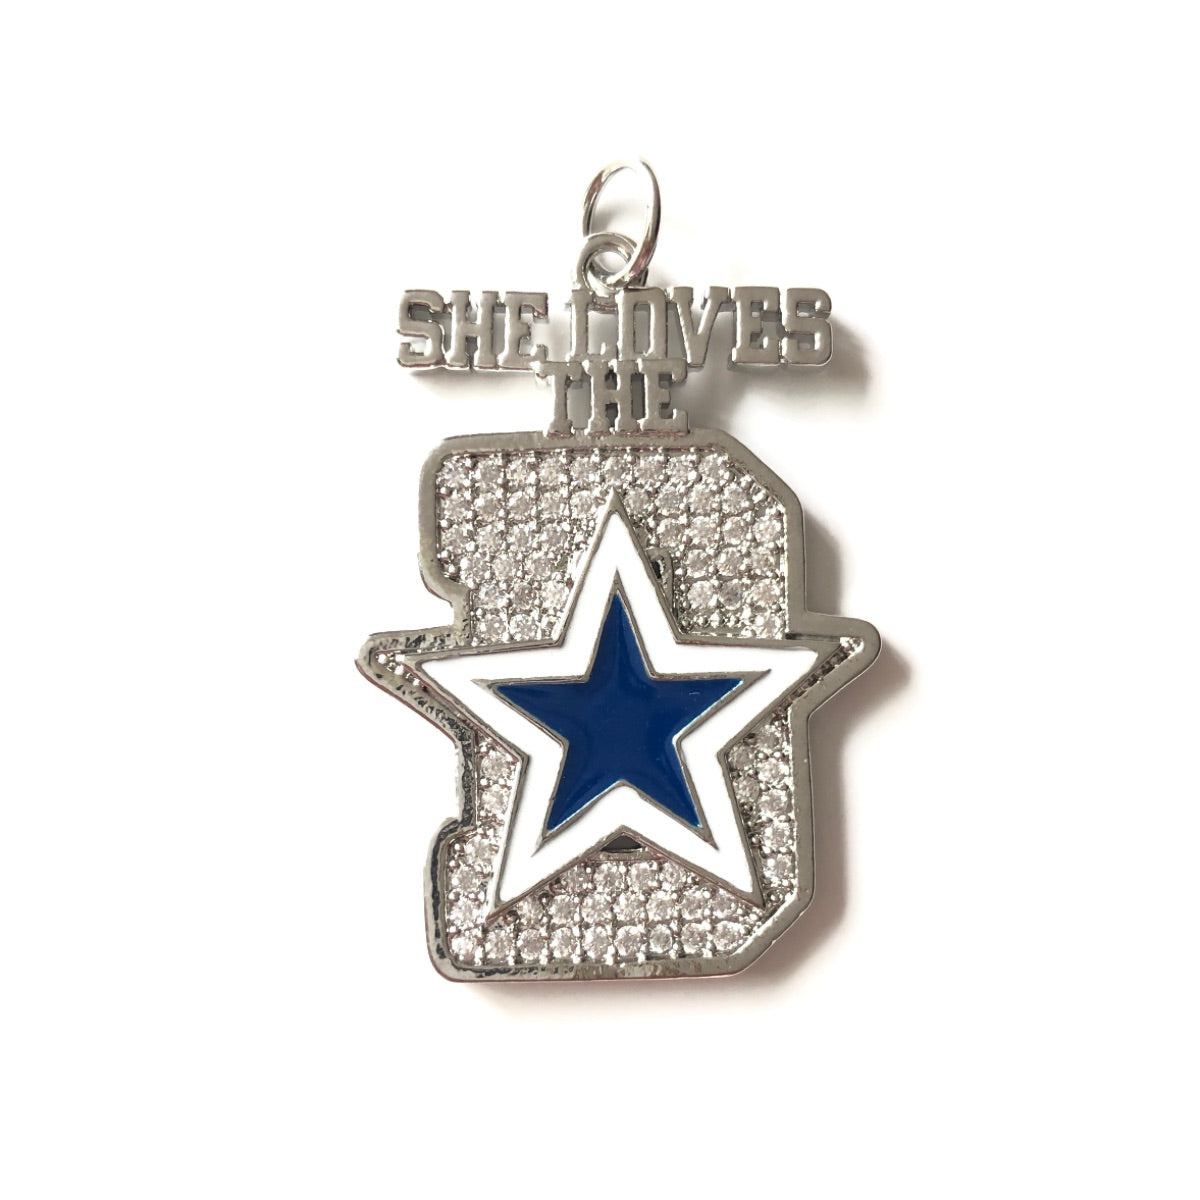 10pcs/lot 35*25mm Cowboys Star CZ Paved She Loves The D Word Charms Silver CZ Paved Charms American Football Sports New Charms Arrivals Charms Beads Beyond